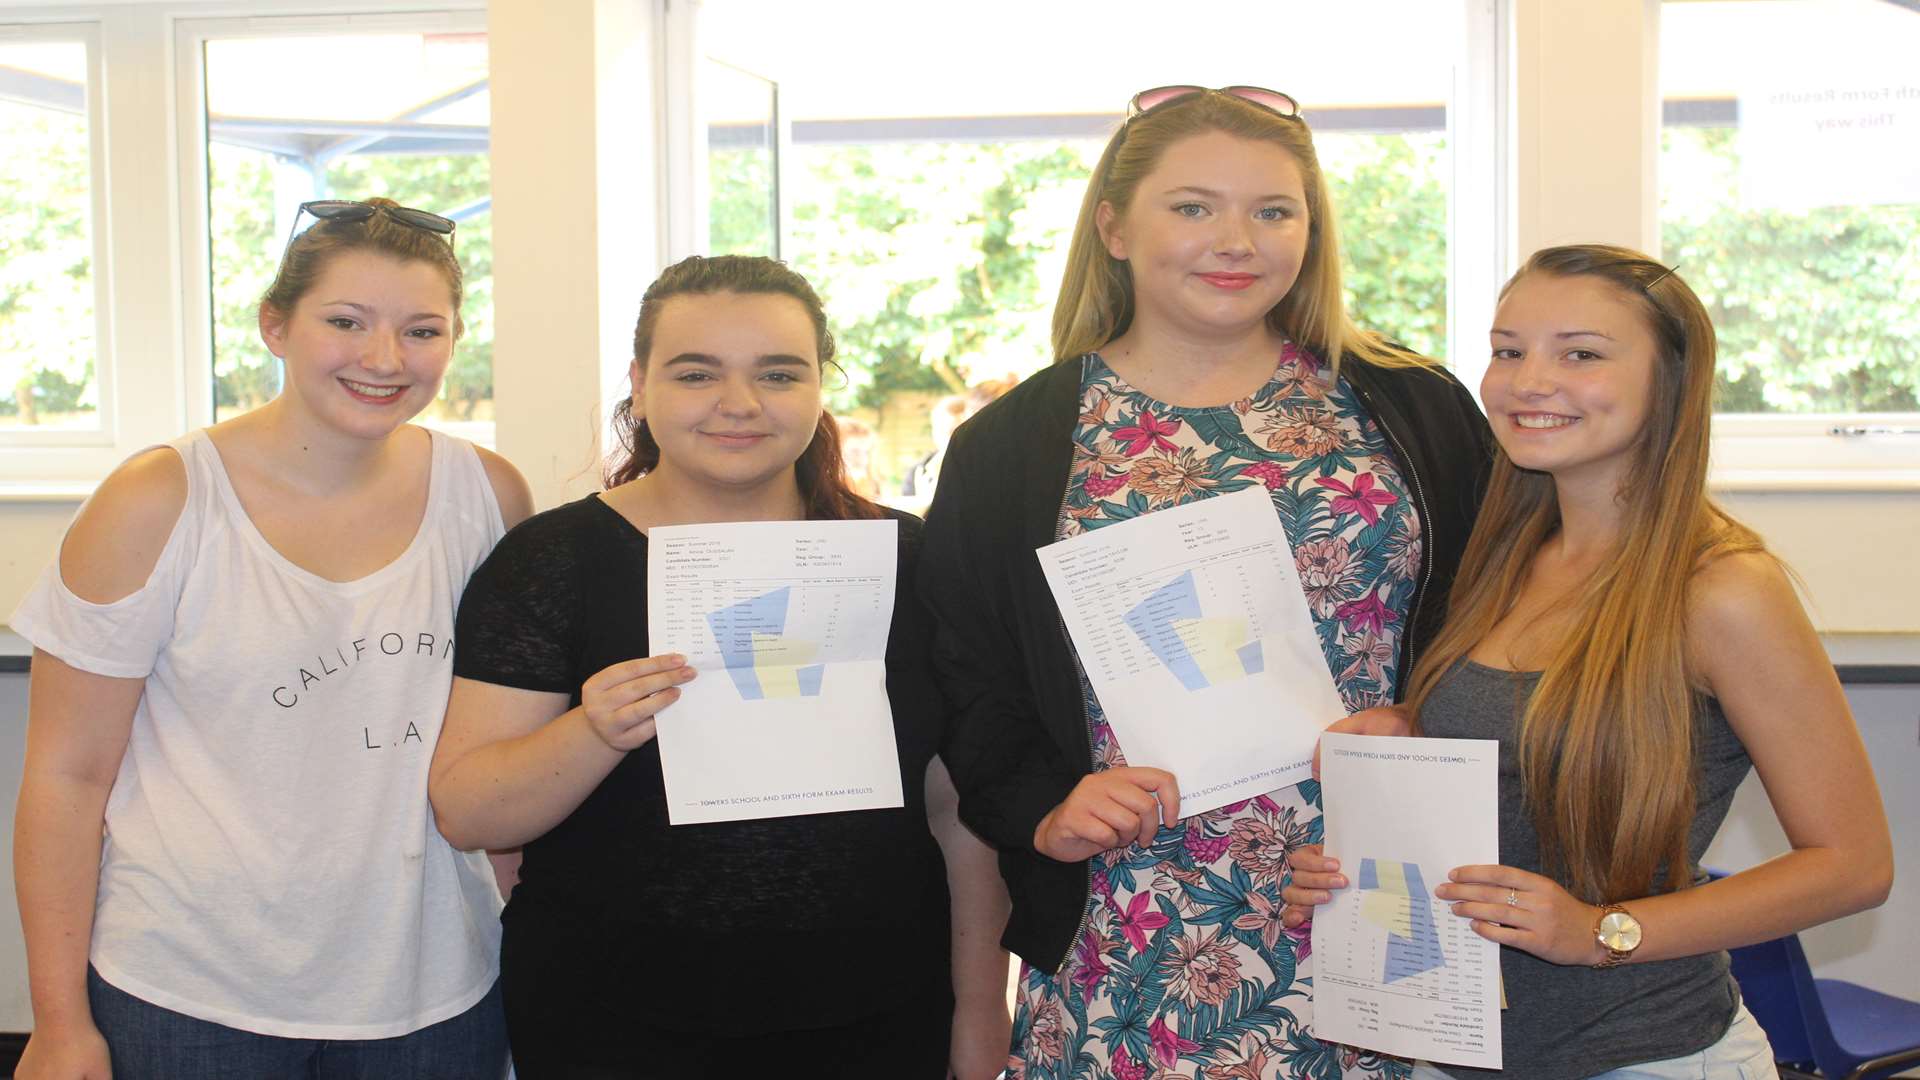 Towers School pupils Kayleigh Spencer-Brown, Amina Oussalah, Alexia Taylor and Chloe Dawson celebrate their results